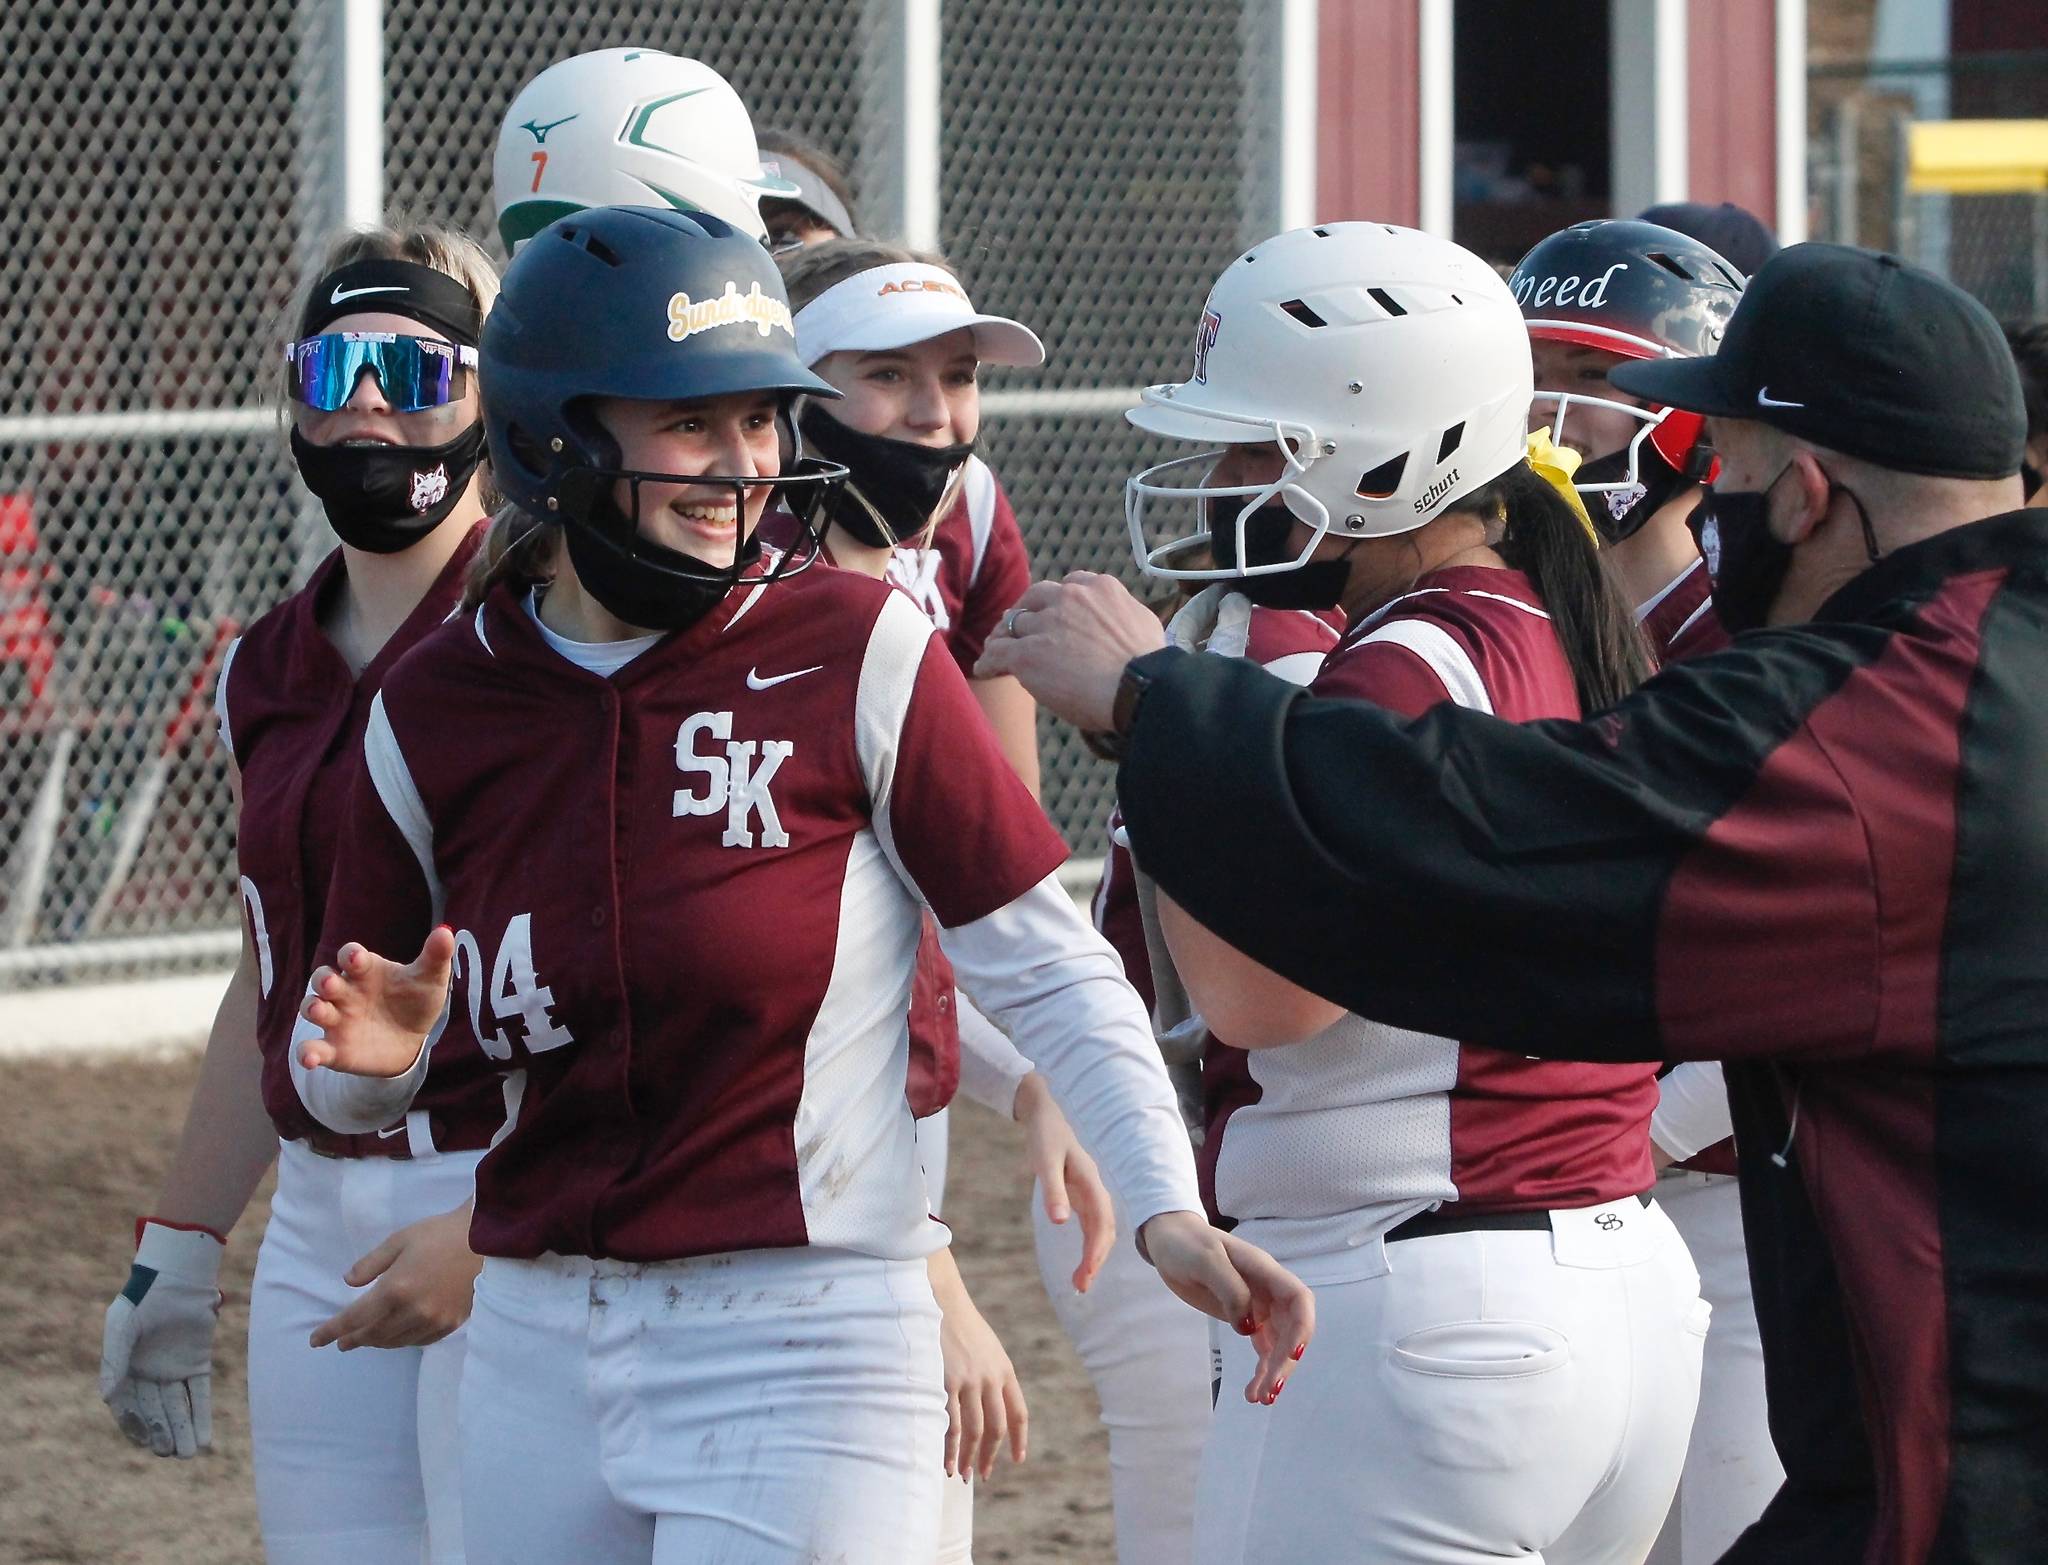 Emma Stamp is all smiles as she celebrates one of her two home runs against Curtis in South Kitsap’s first game of the season. (Mark Krulish/Kitsap News Group)